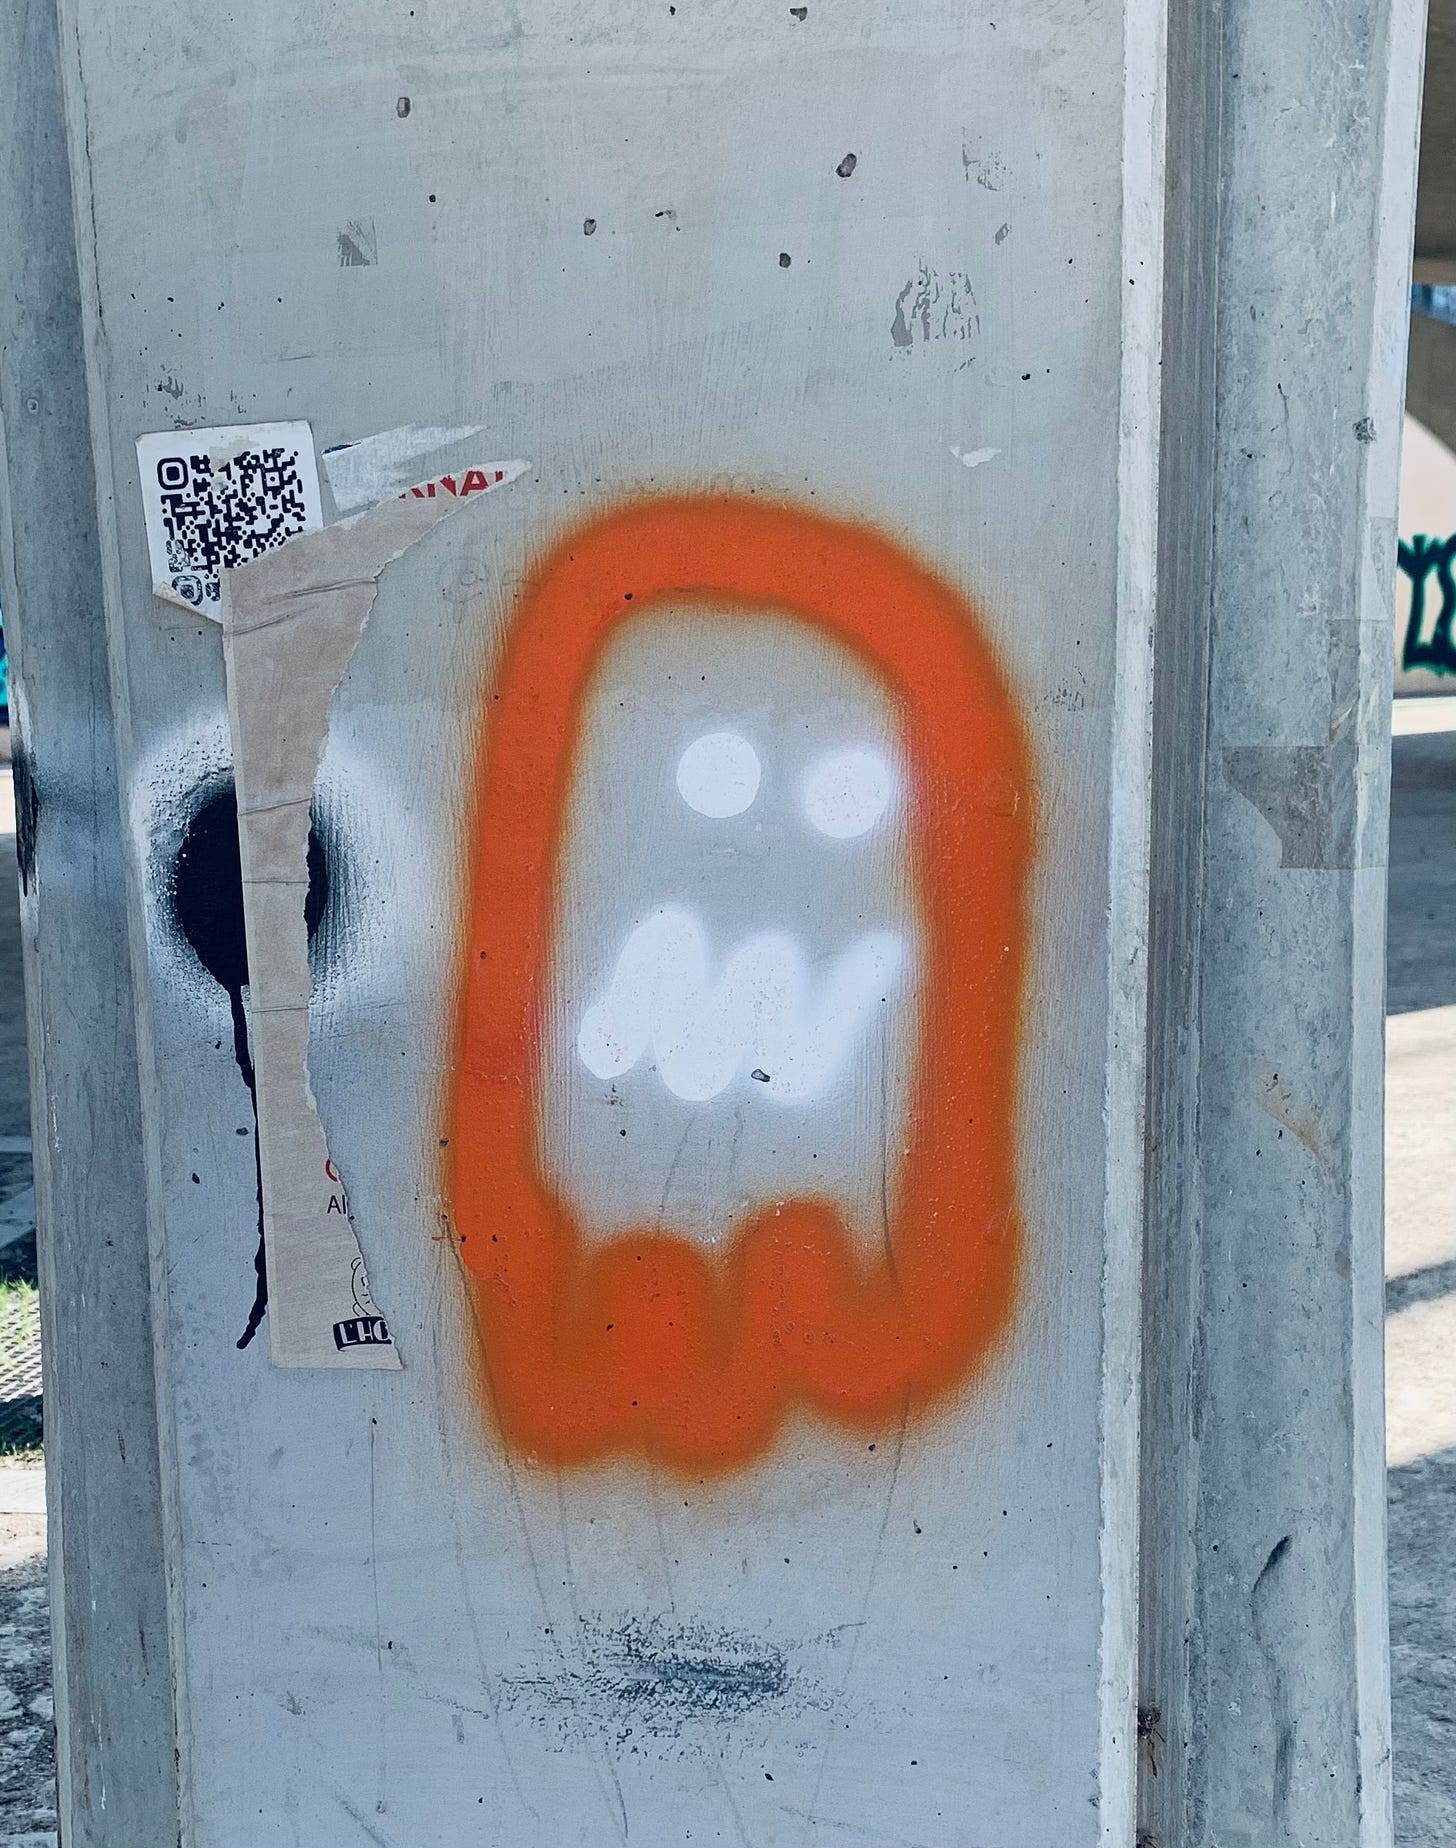 An orange and white ghost in the style of the Pac-Man video game is spray painted on a concrete pillar in the Turia.